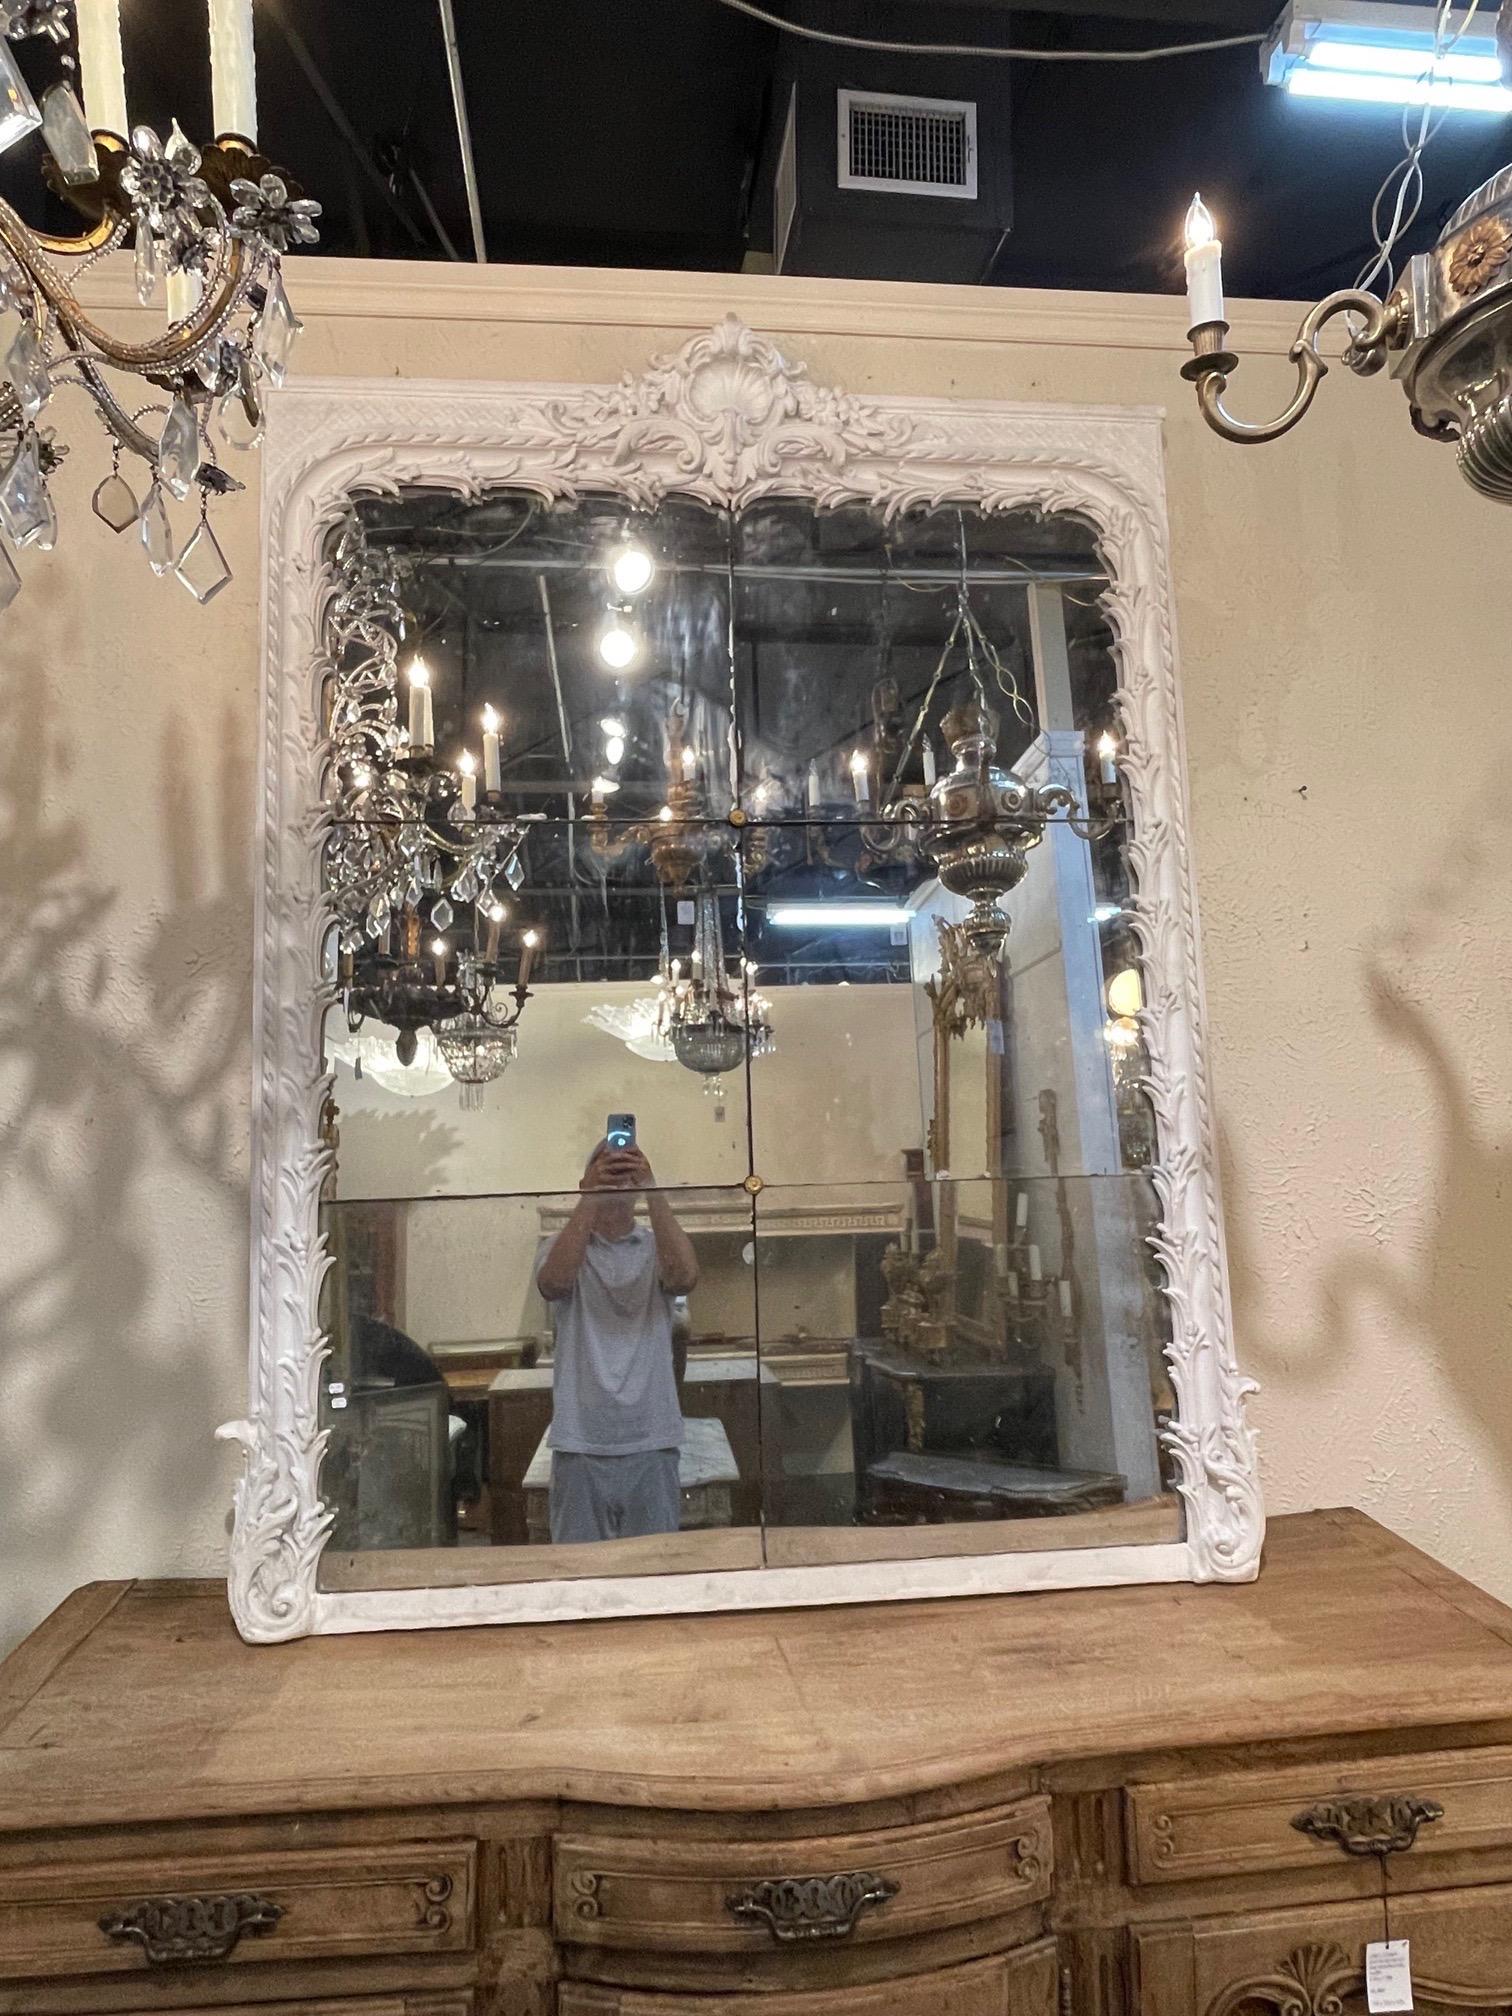 Exquisite large scale 18th century French Louis XV style carved and painted mirror with original divided mercury glass. Beautiful carvings including a decorative crest at the top. Fabulous!!